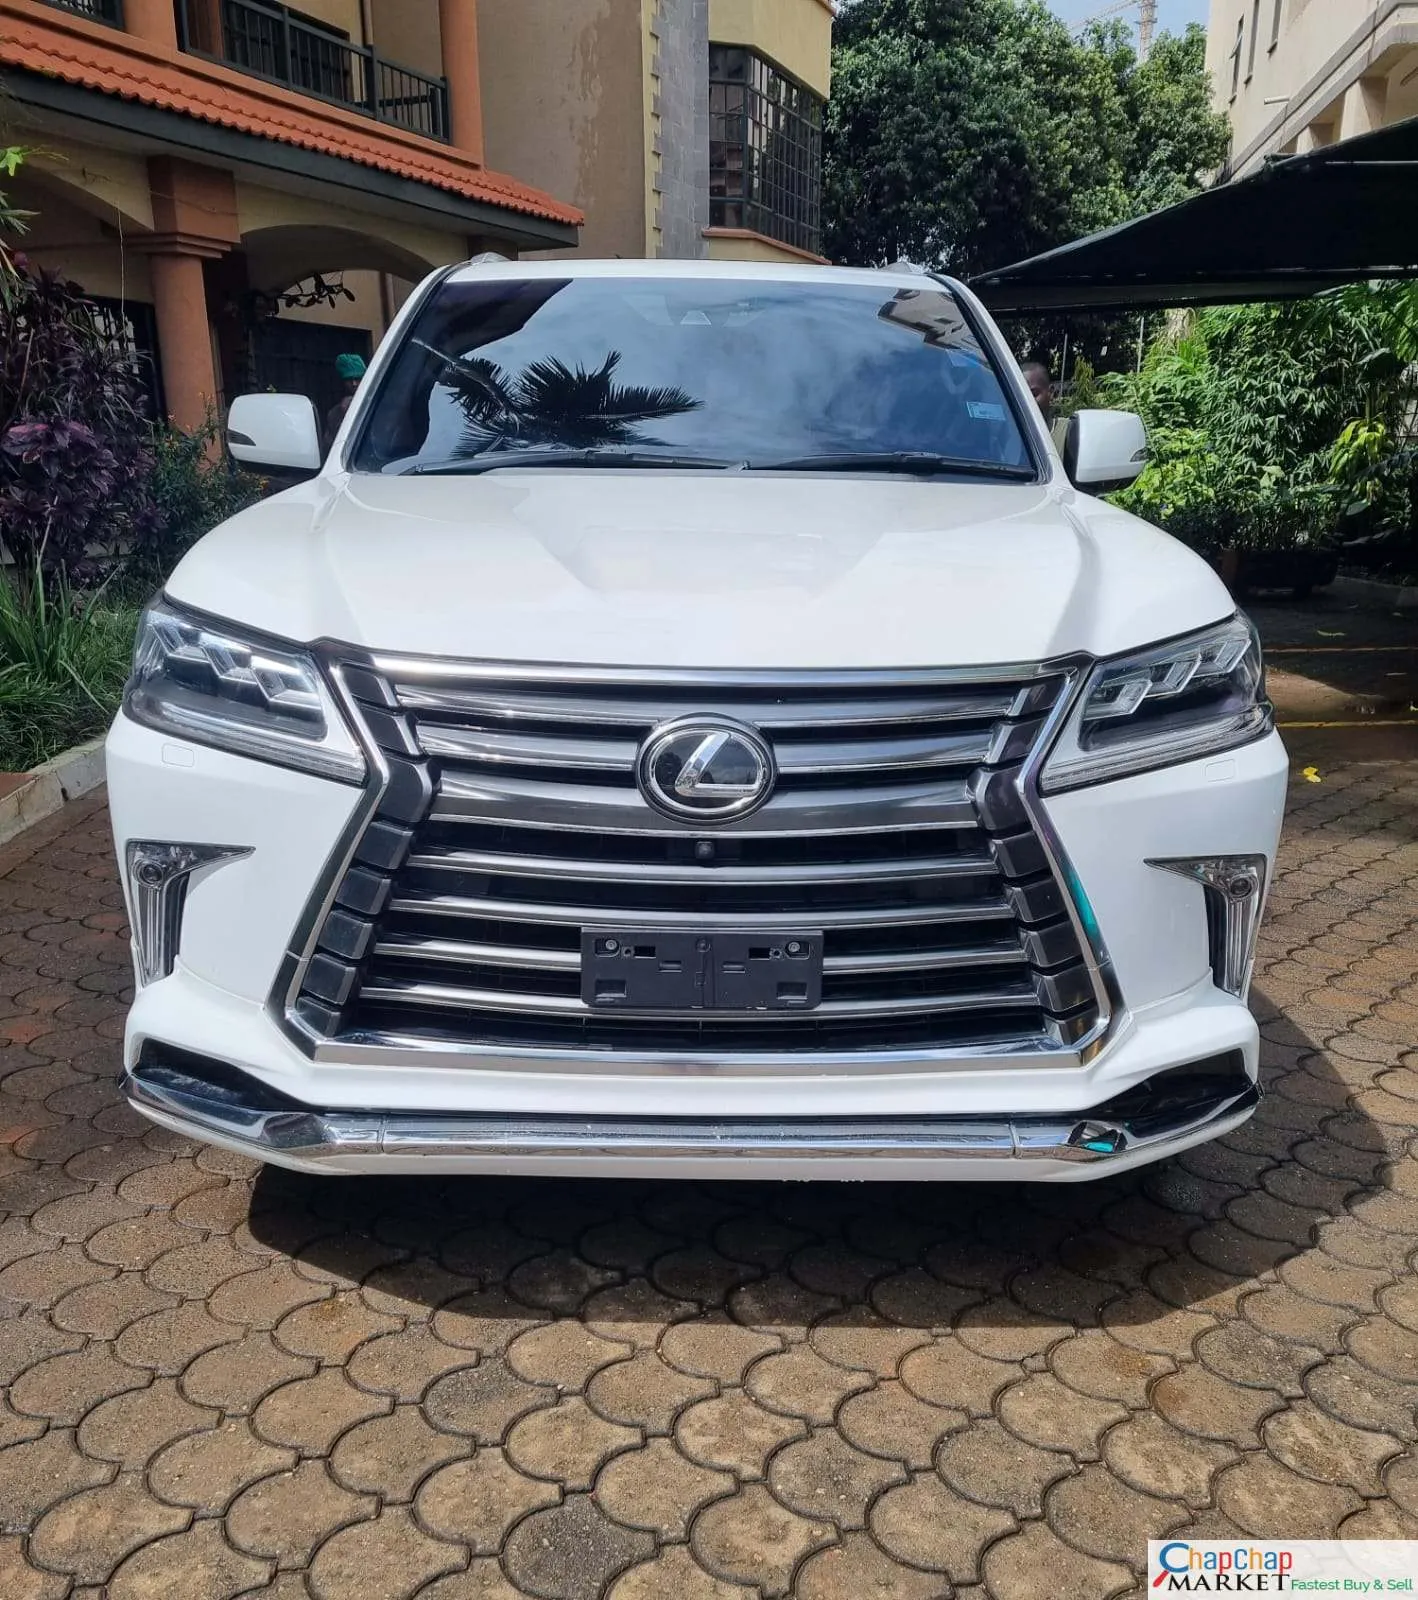 LEXUS LX 570 Kenya CHEAPEST EVER 🔥 Lexus lx 570 for sale in kenya HIRE PURCHASE installments OK EXCLUSIVE For SALE in Kenya